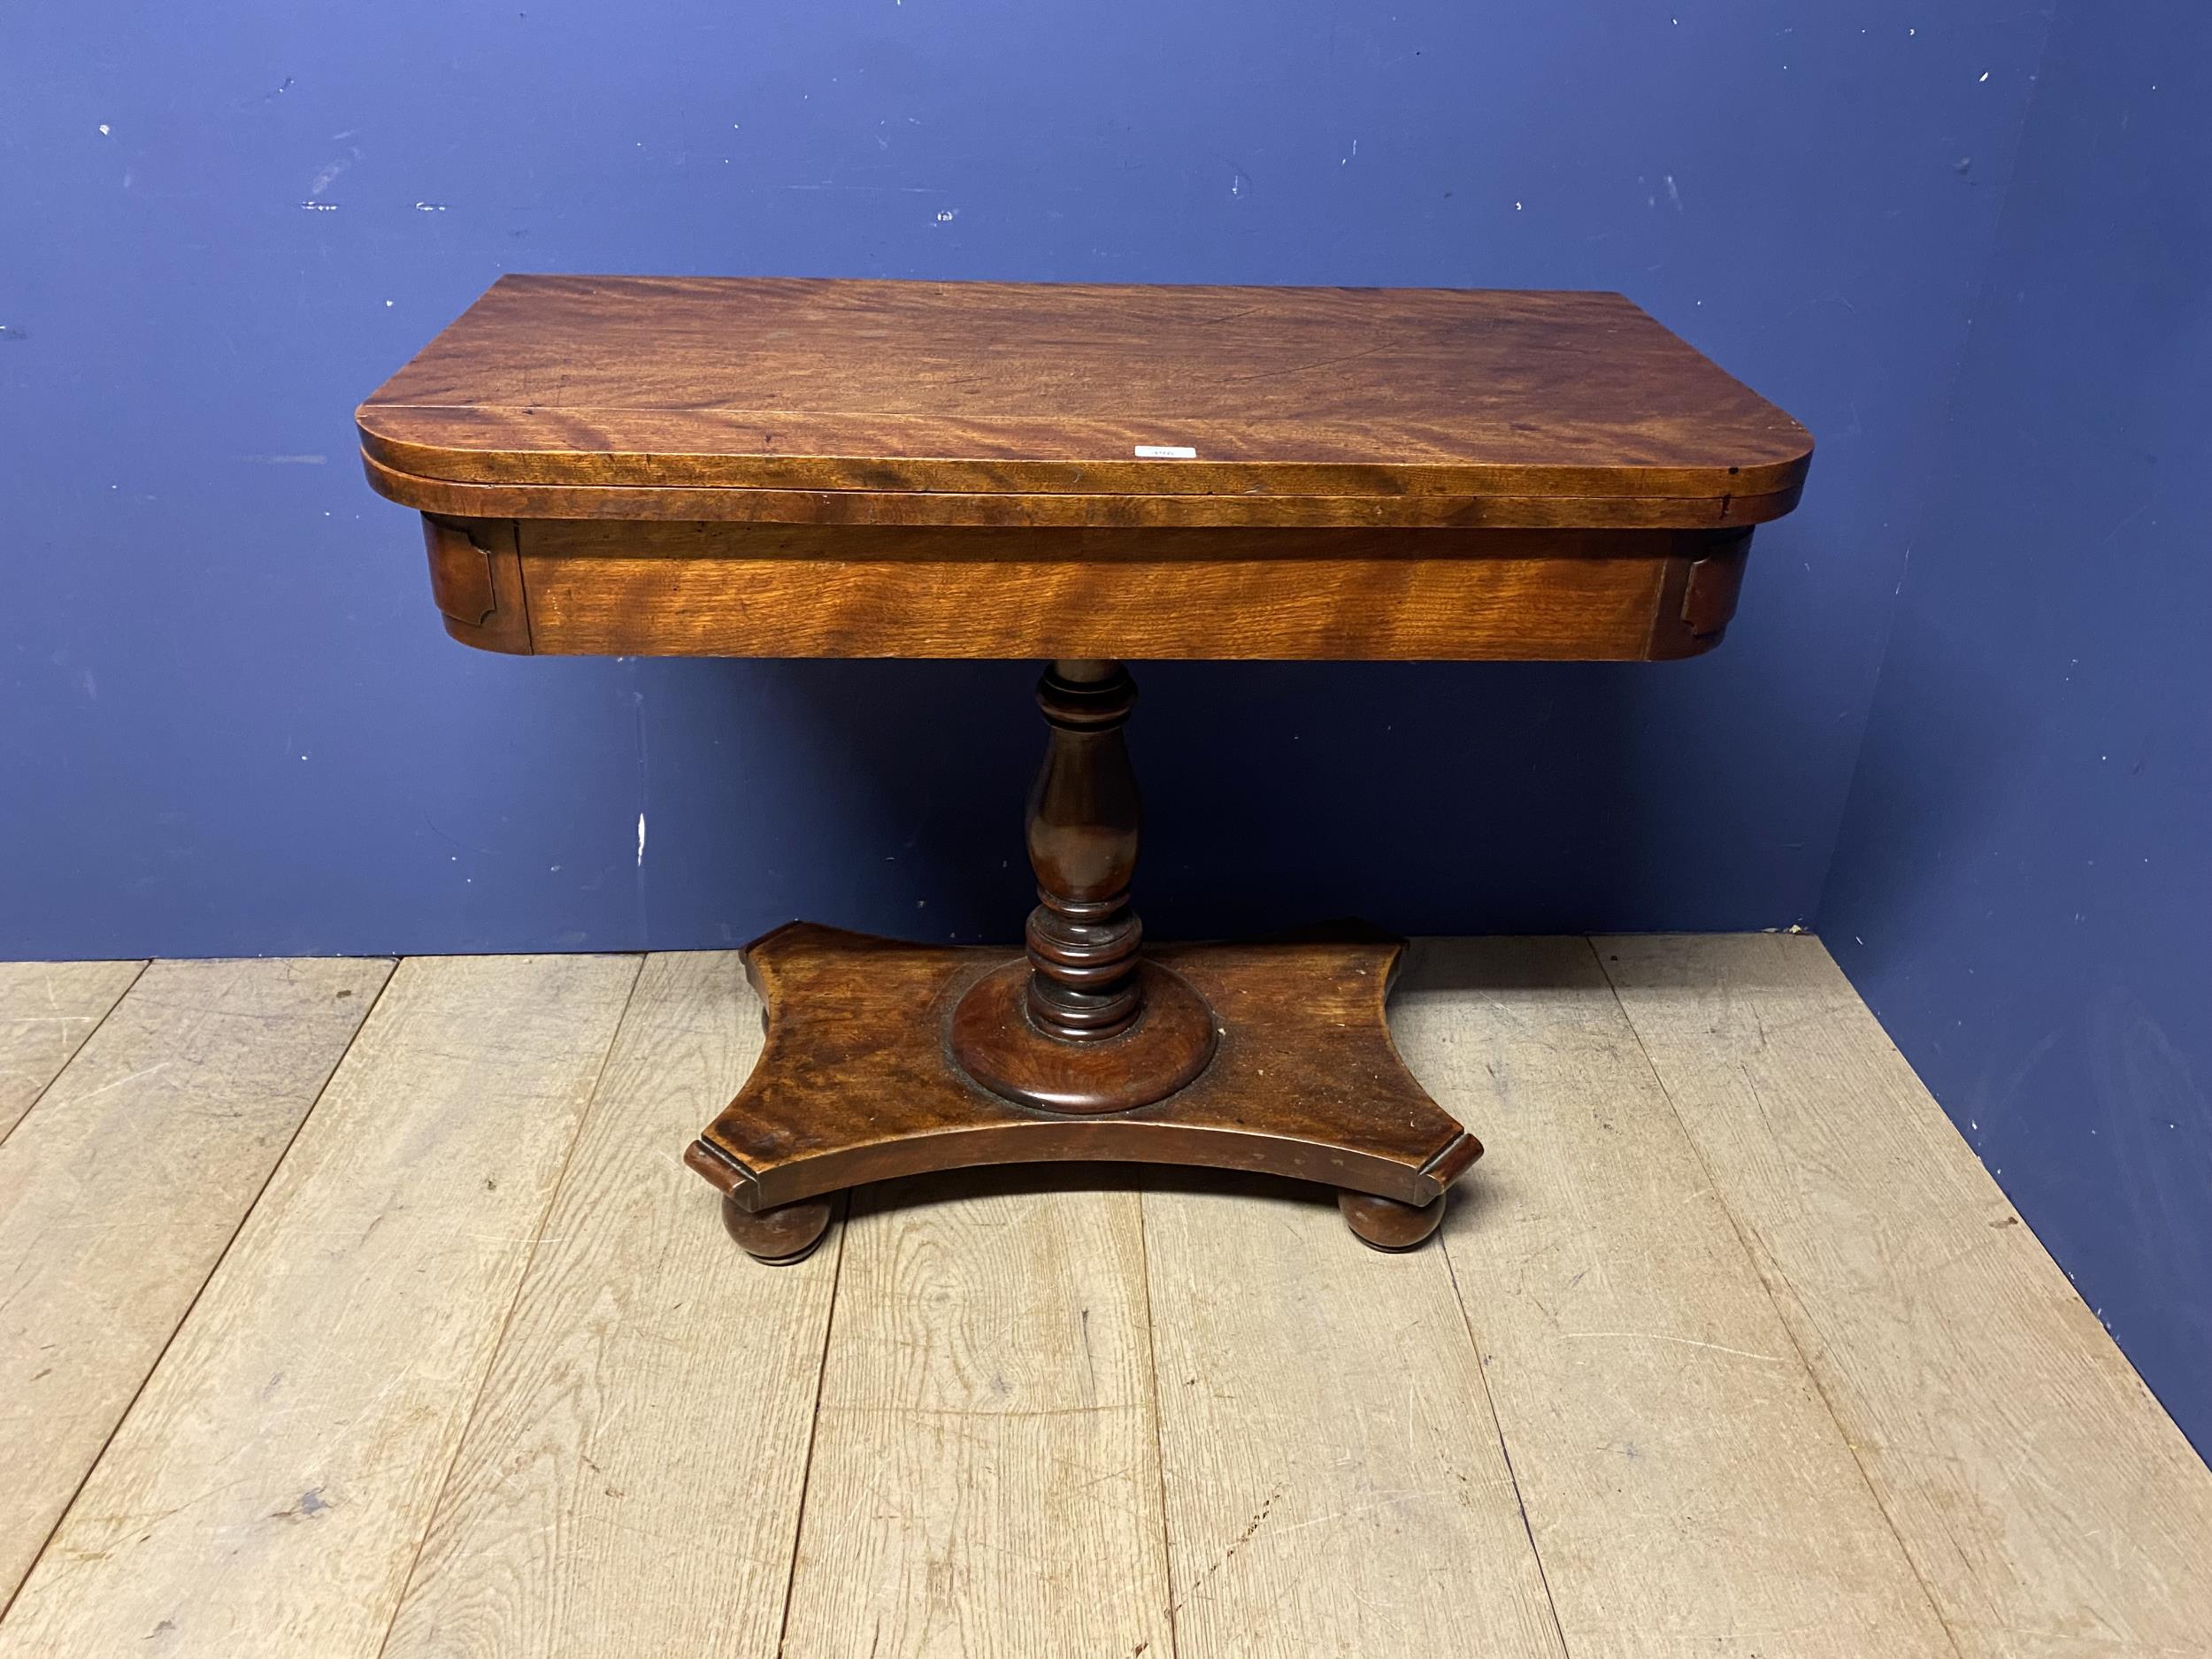 Mahogany tea table, with original fitted interior - see images, 91cm wide - condition - wear and